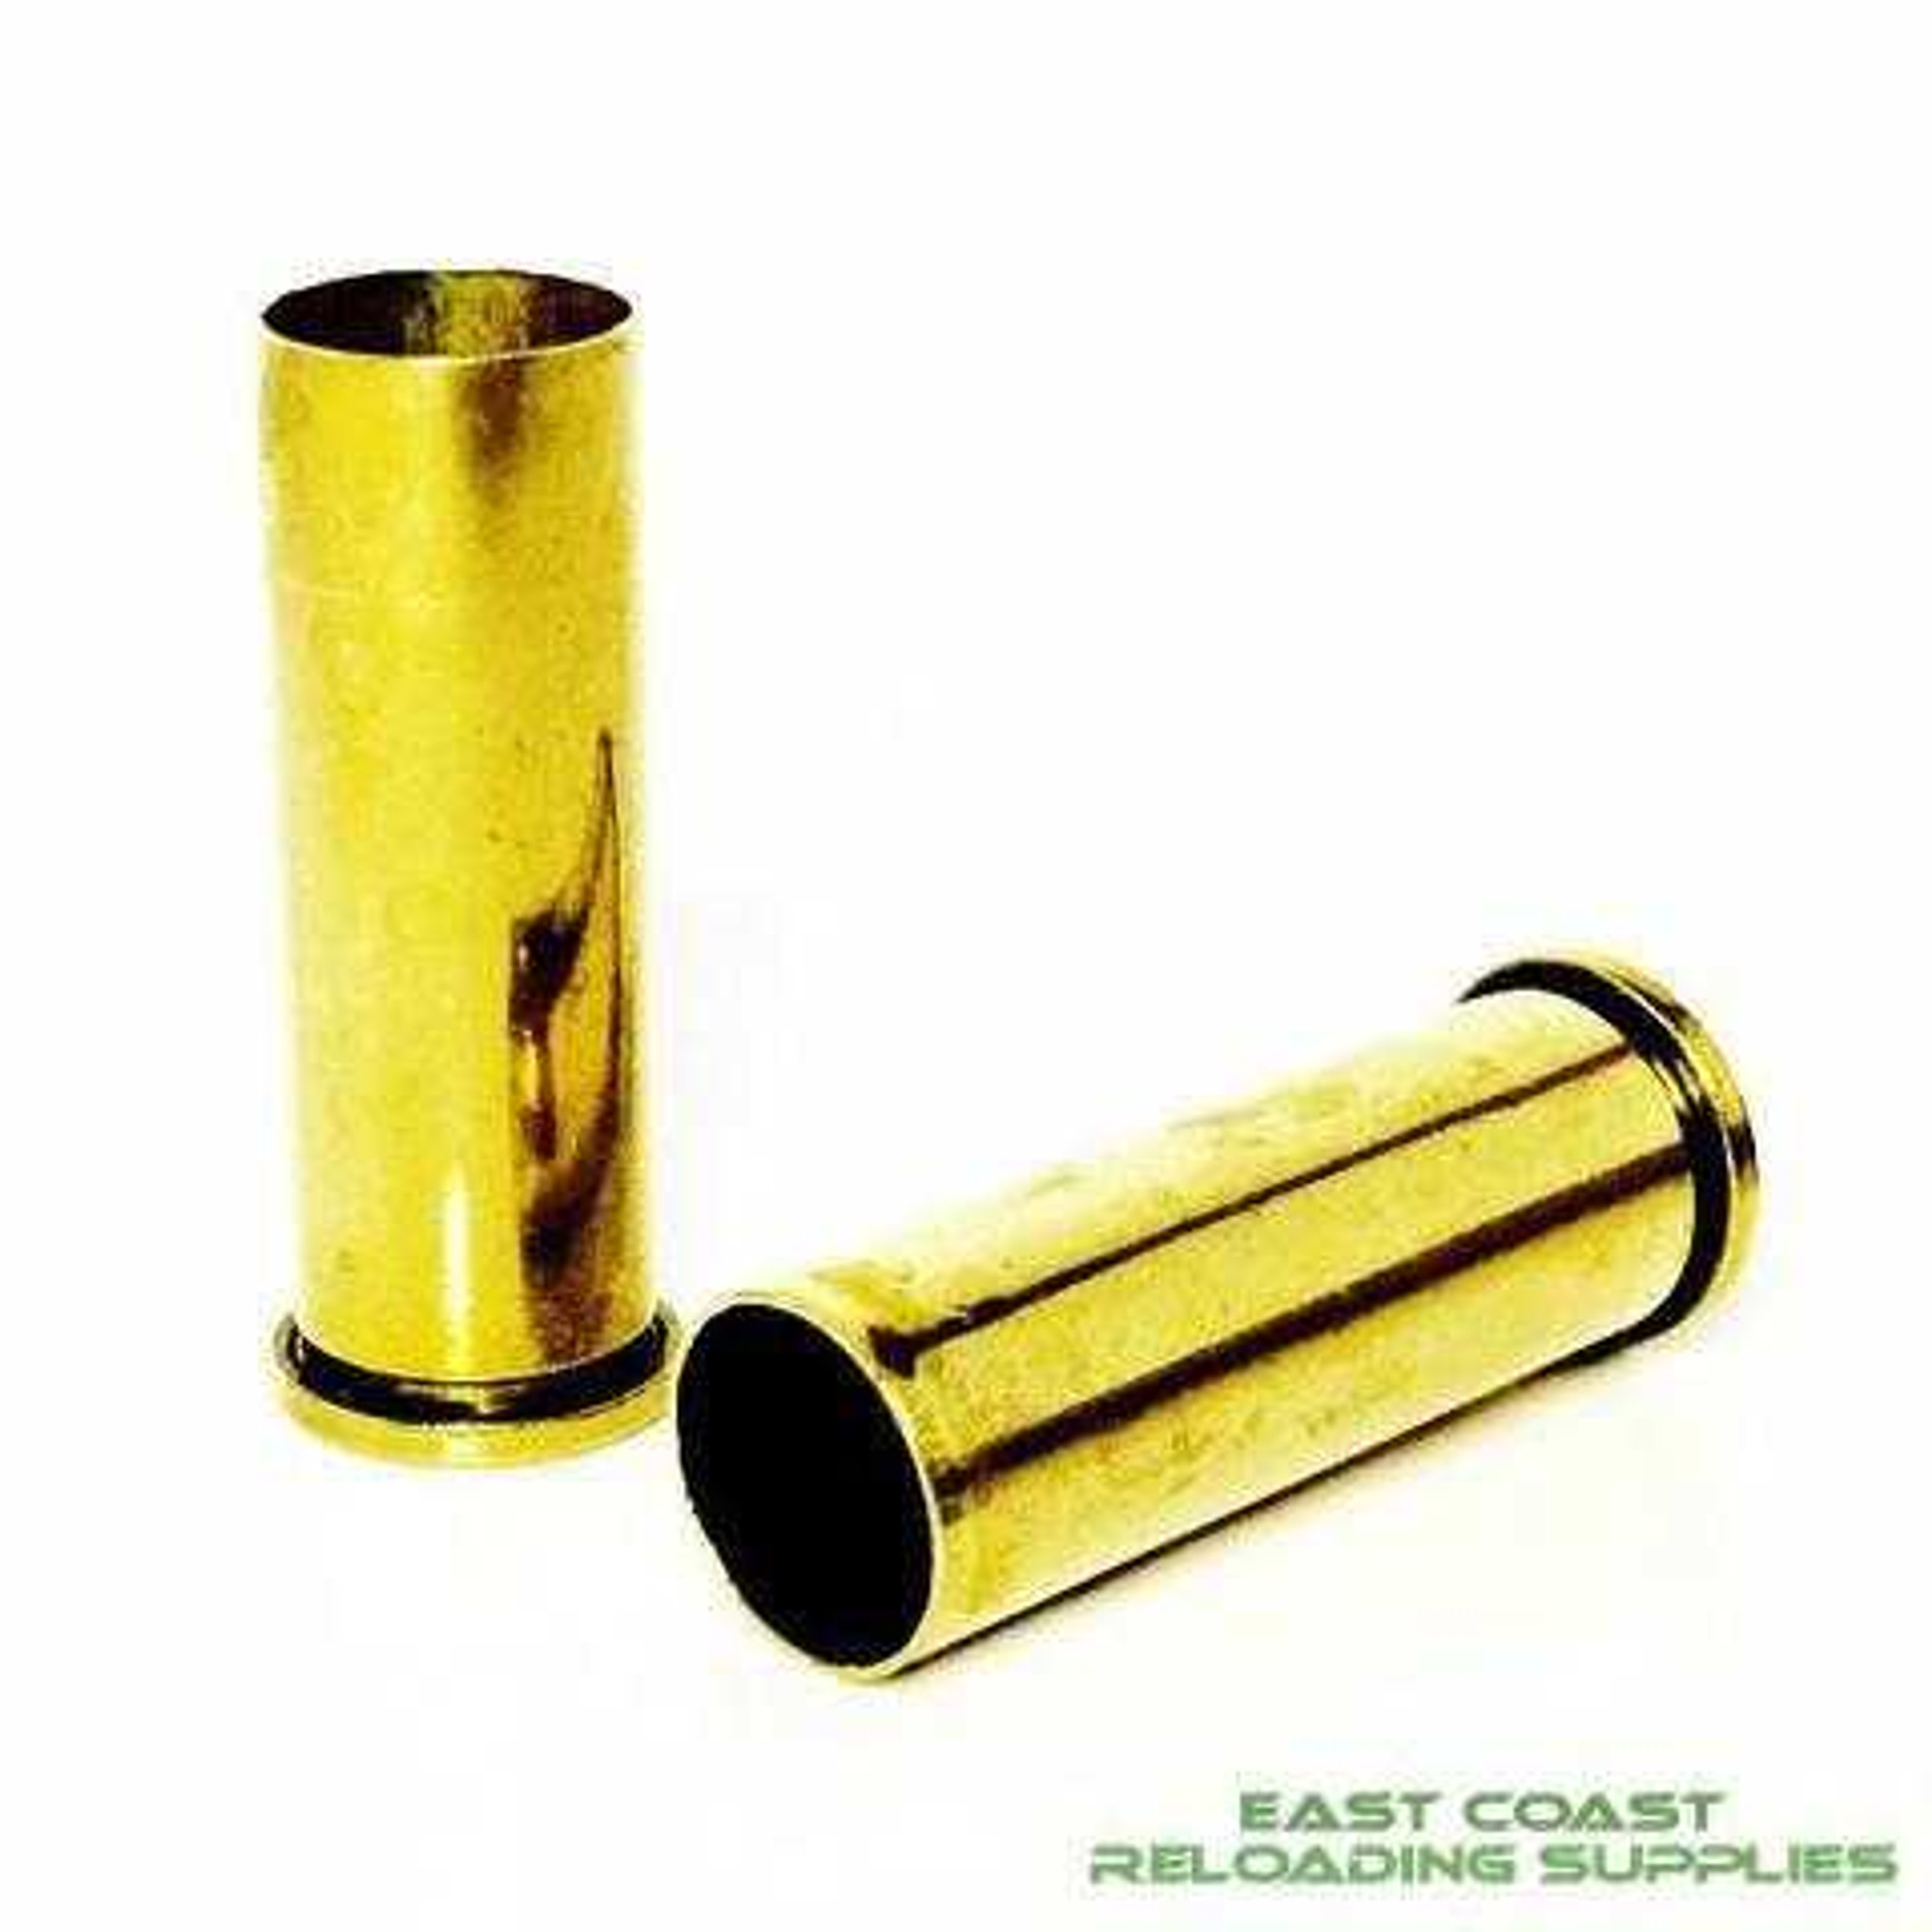 once fired 38 special bulk brass for reloading free shipping in stock